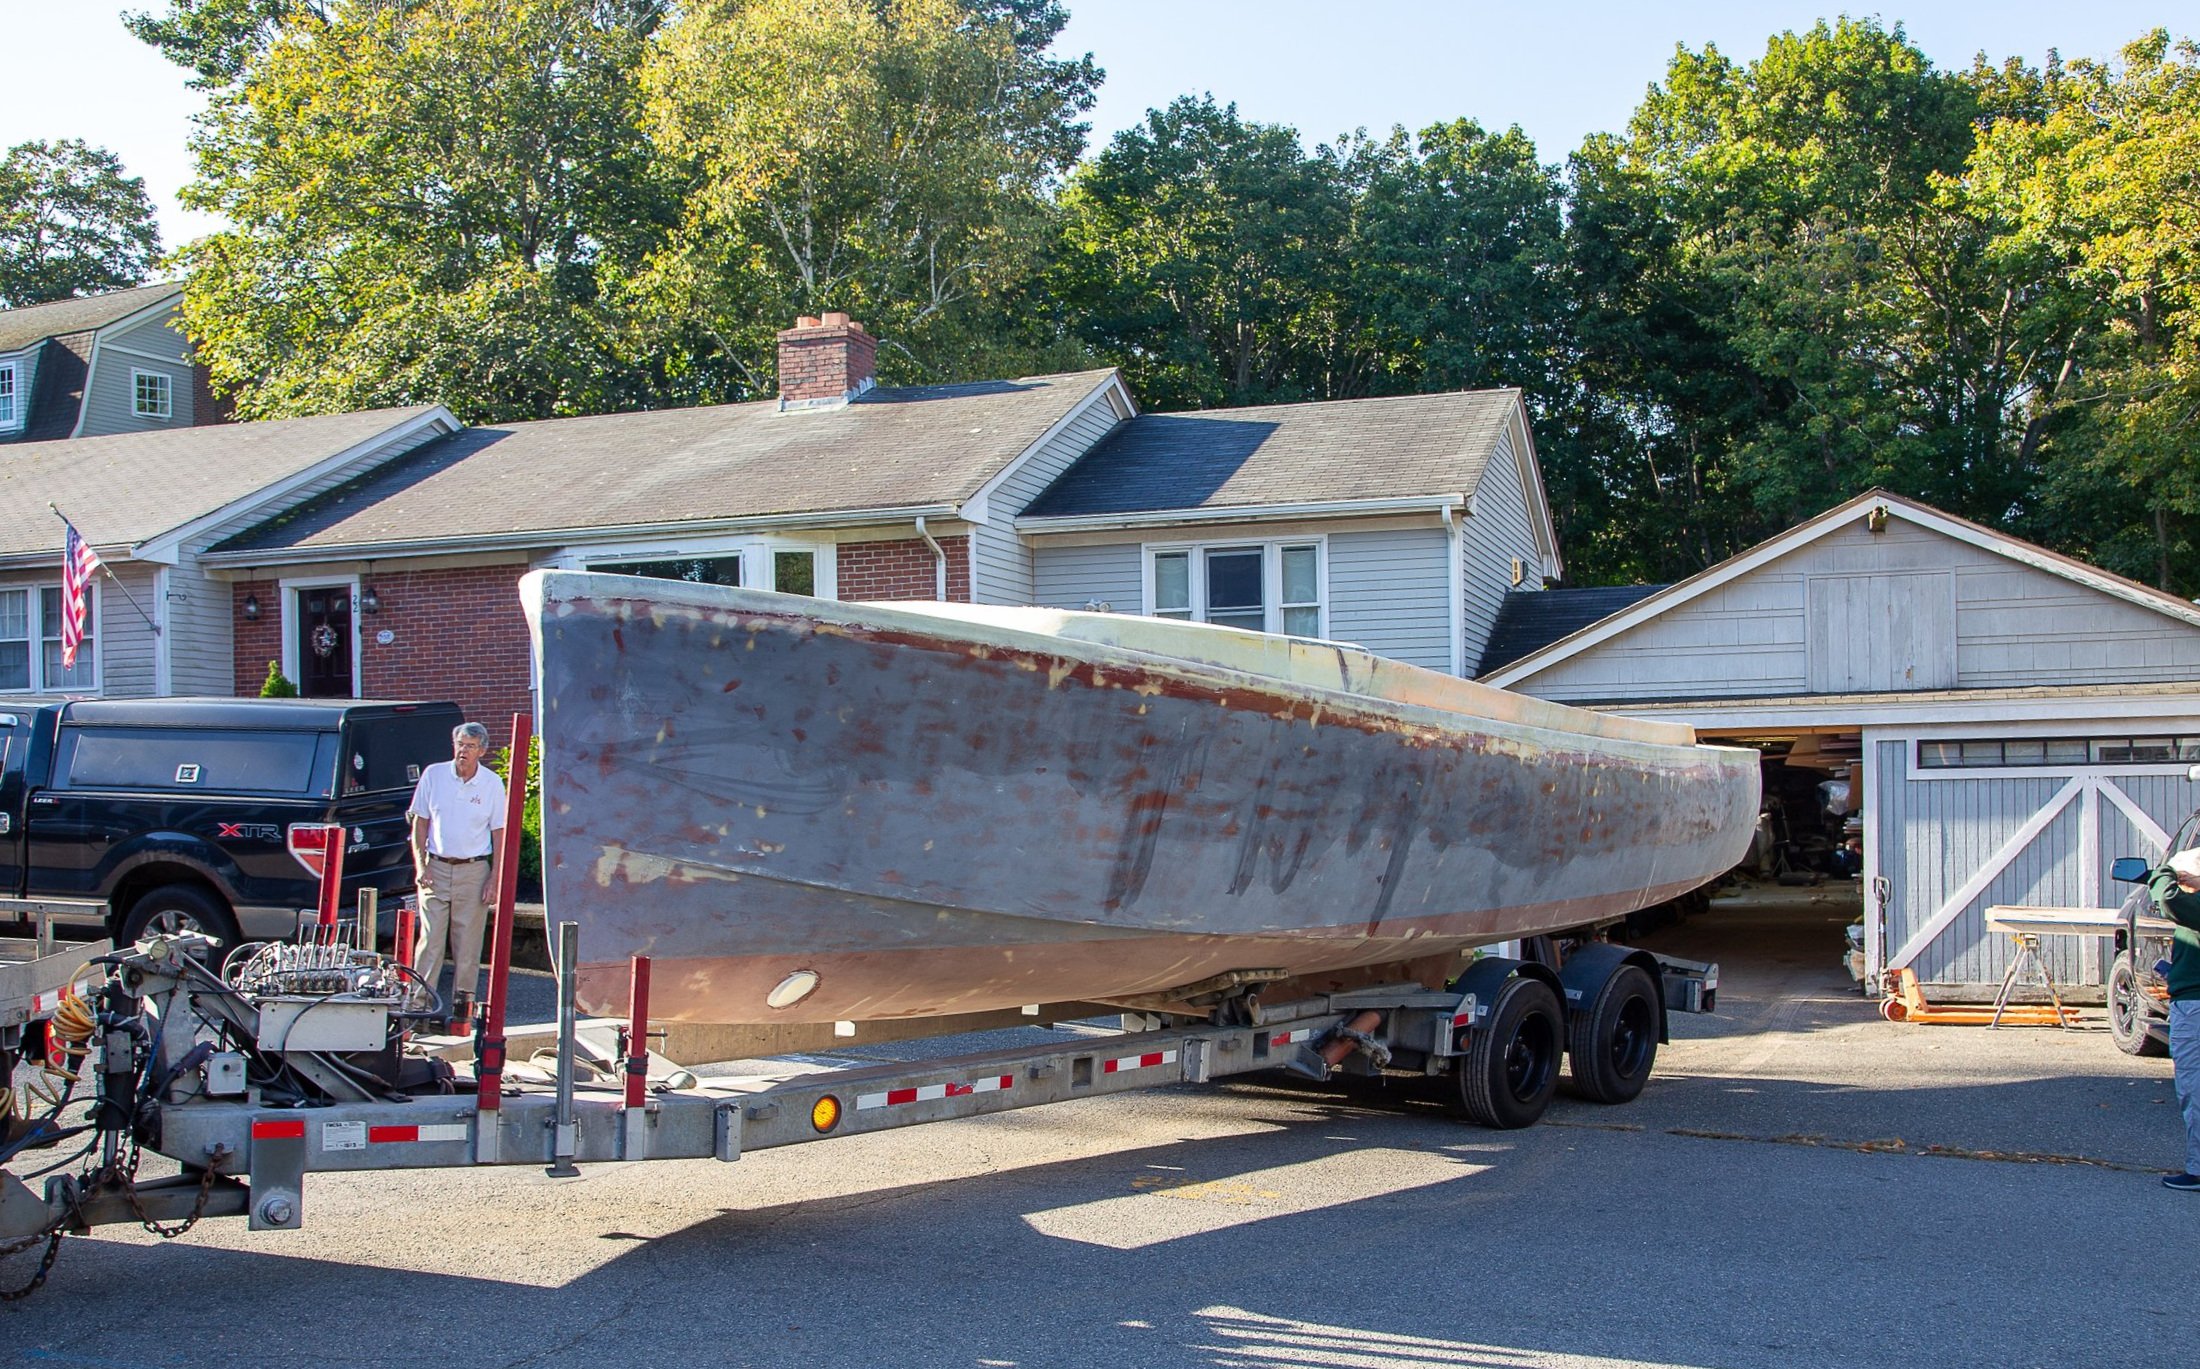    Appy VI hull ready to be transported to Boston Boatworks in Boston.   